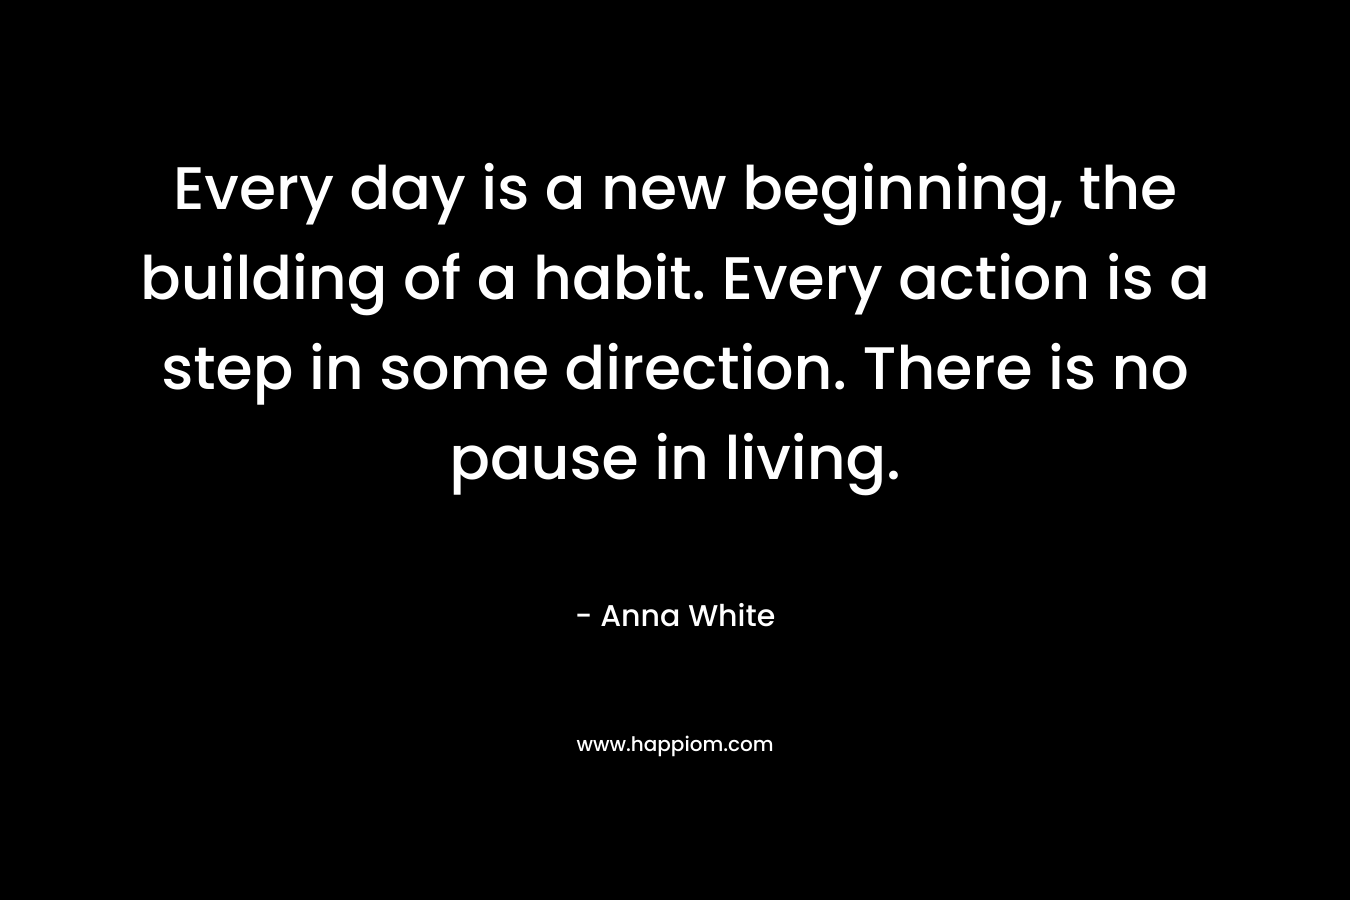 Every day is a new beginning, the building of a habit. Every action is a step in some direction. There is no pause in living.